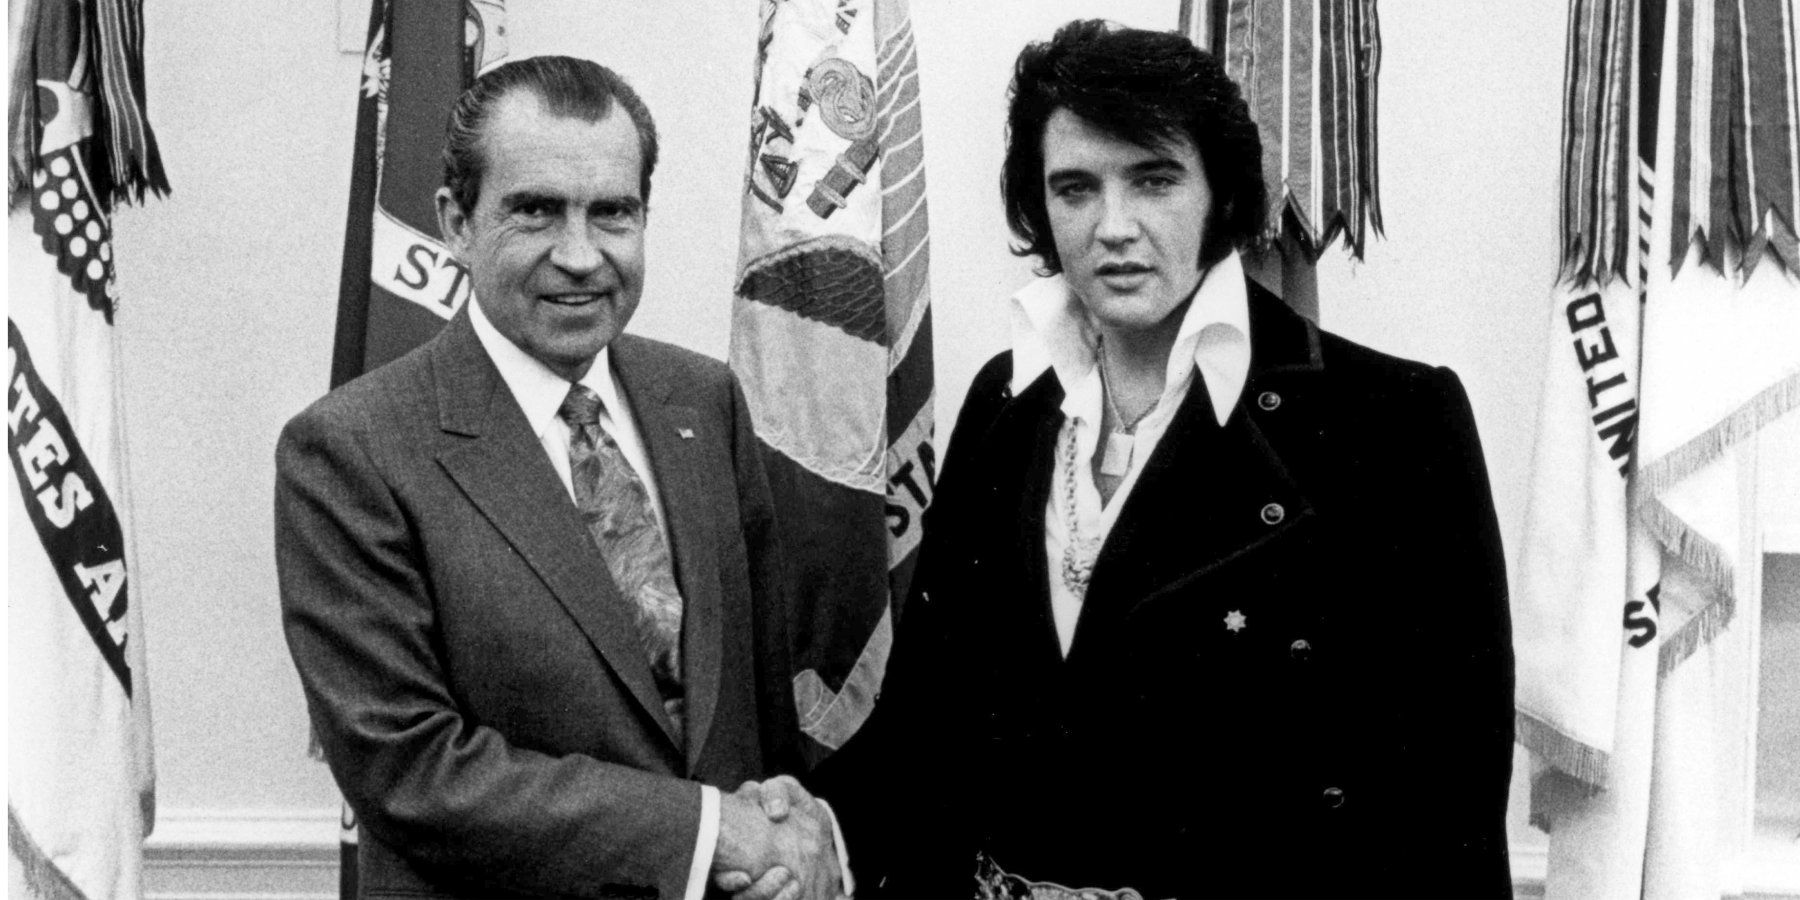 Richard Nixon and Elvis Presley shake hands in the Oval Office of The White House in 1970.